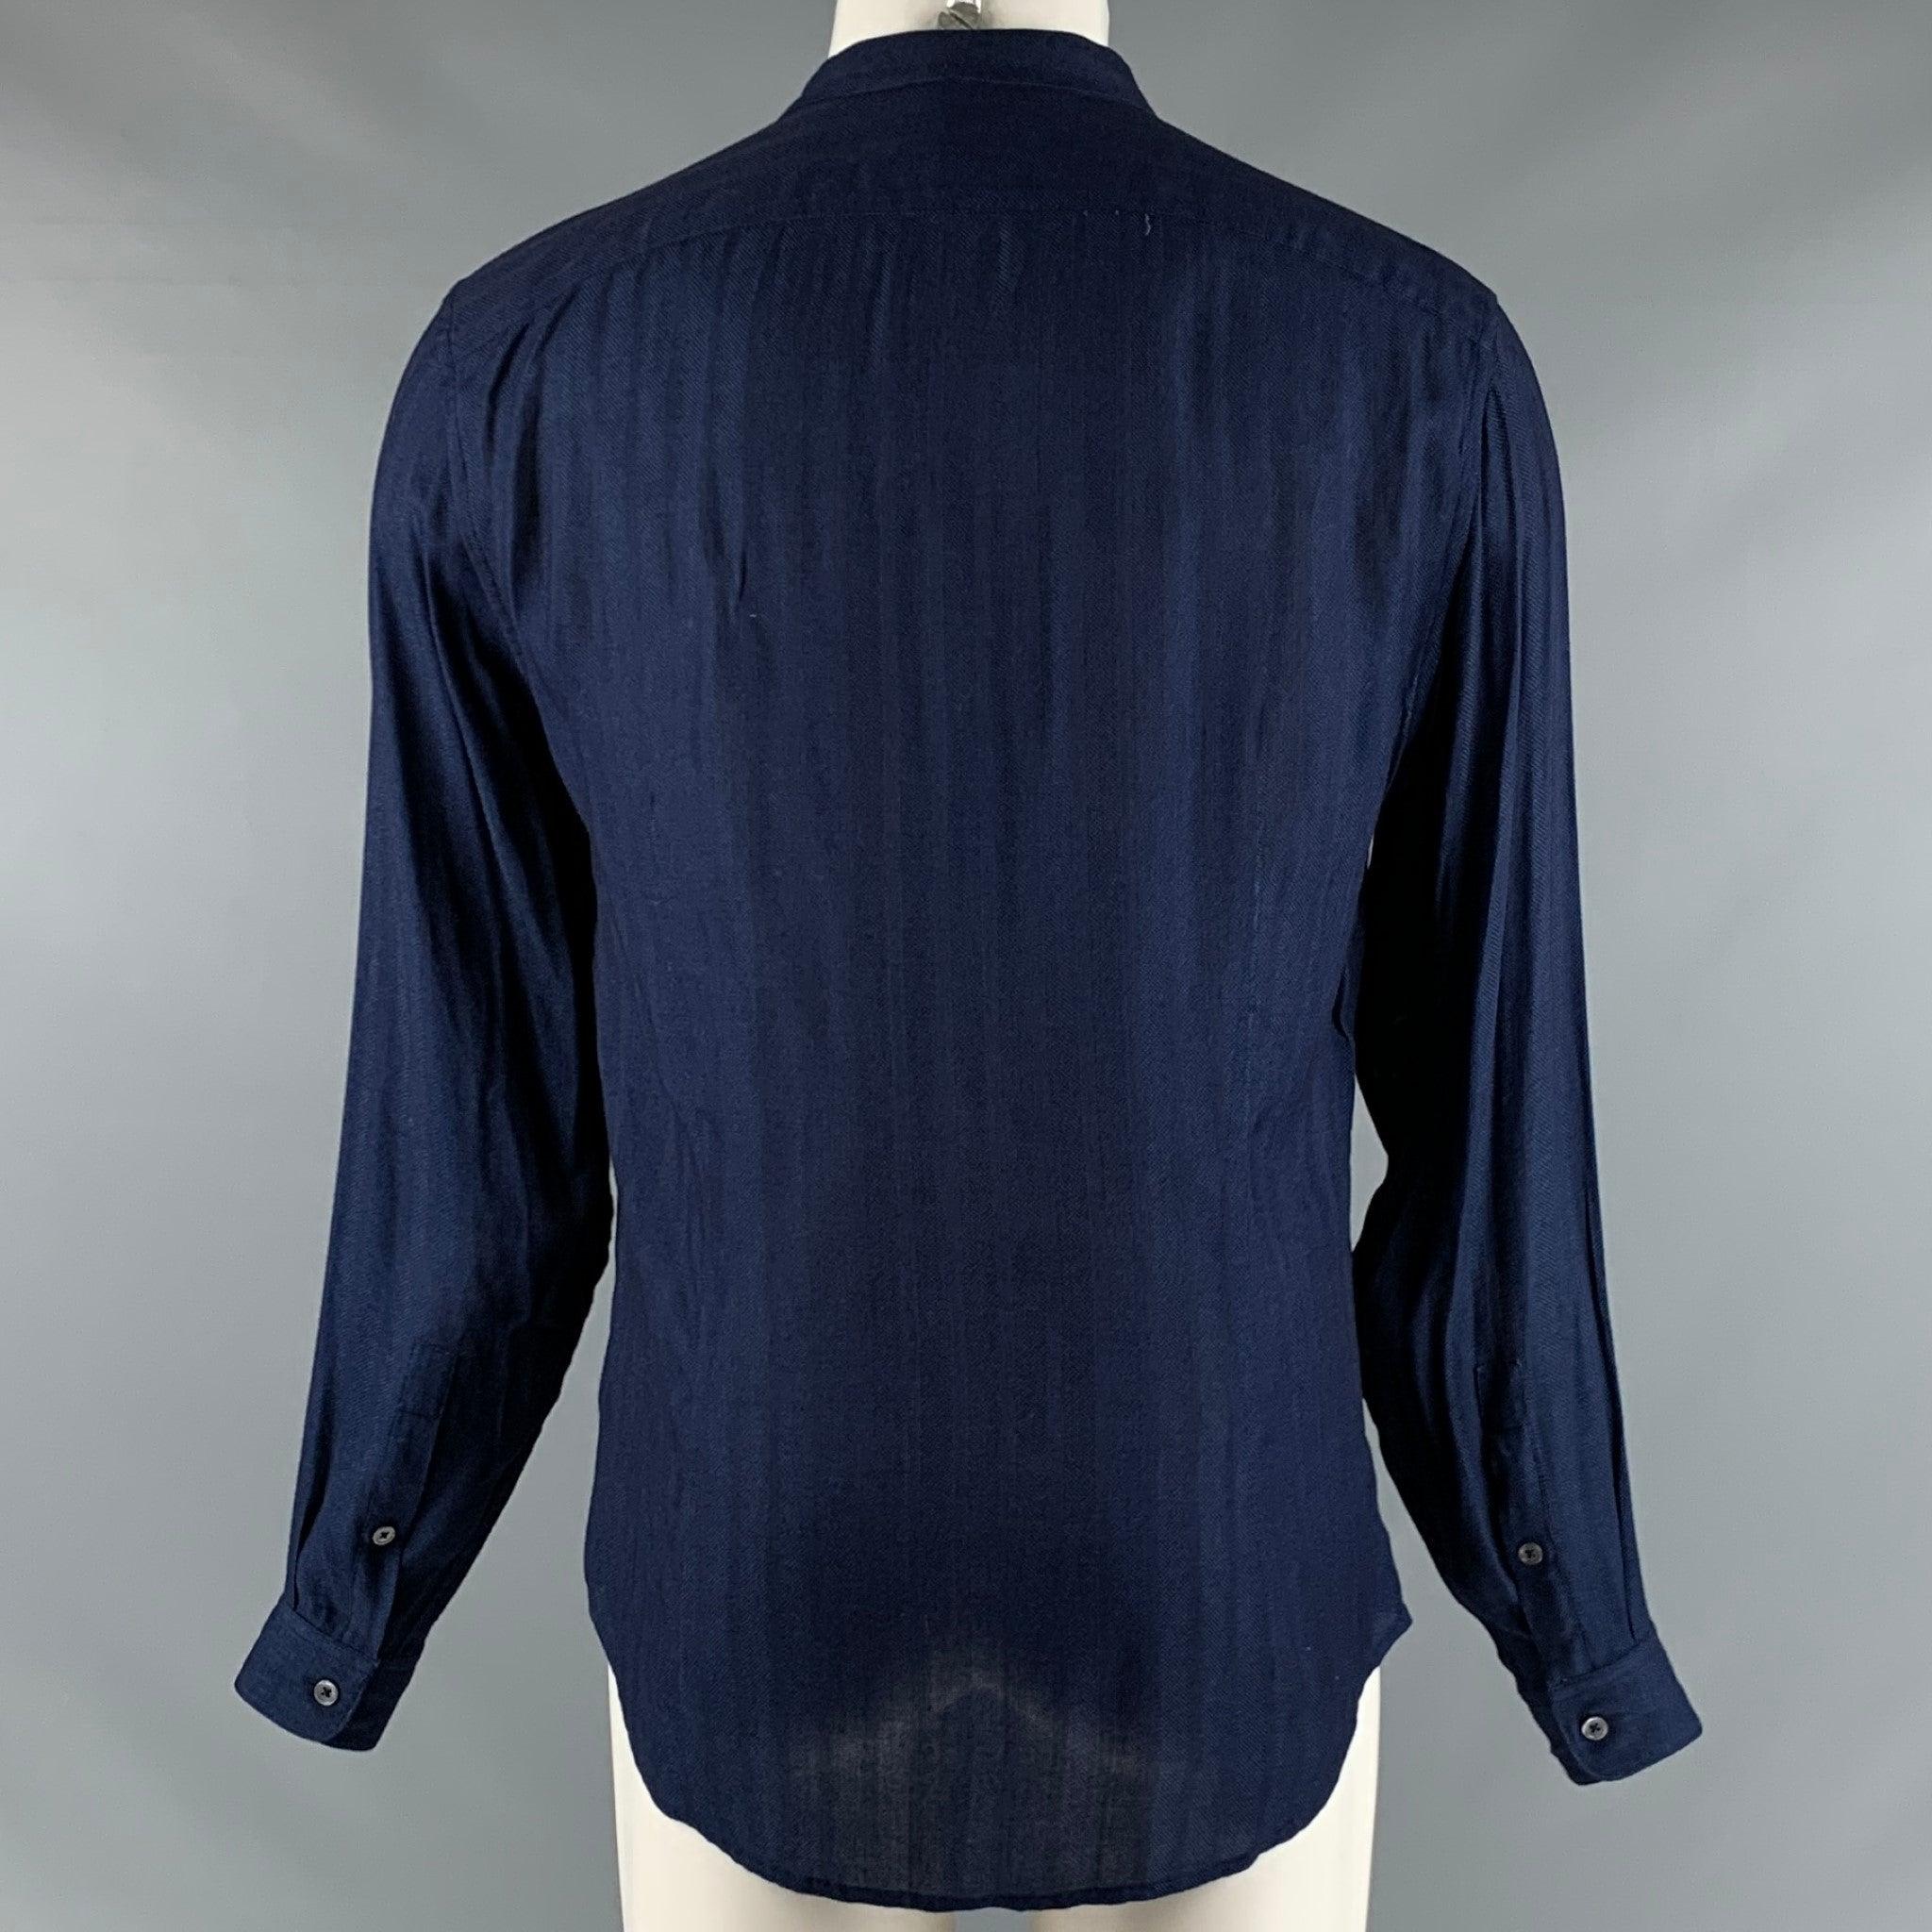 JOHN VARVATOS Size S Blue Navy Textured Viscose Nehru Collar Long Sleeve Shirt In Good Condition For Sale In San Francisco, CA